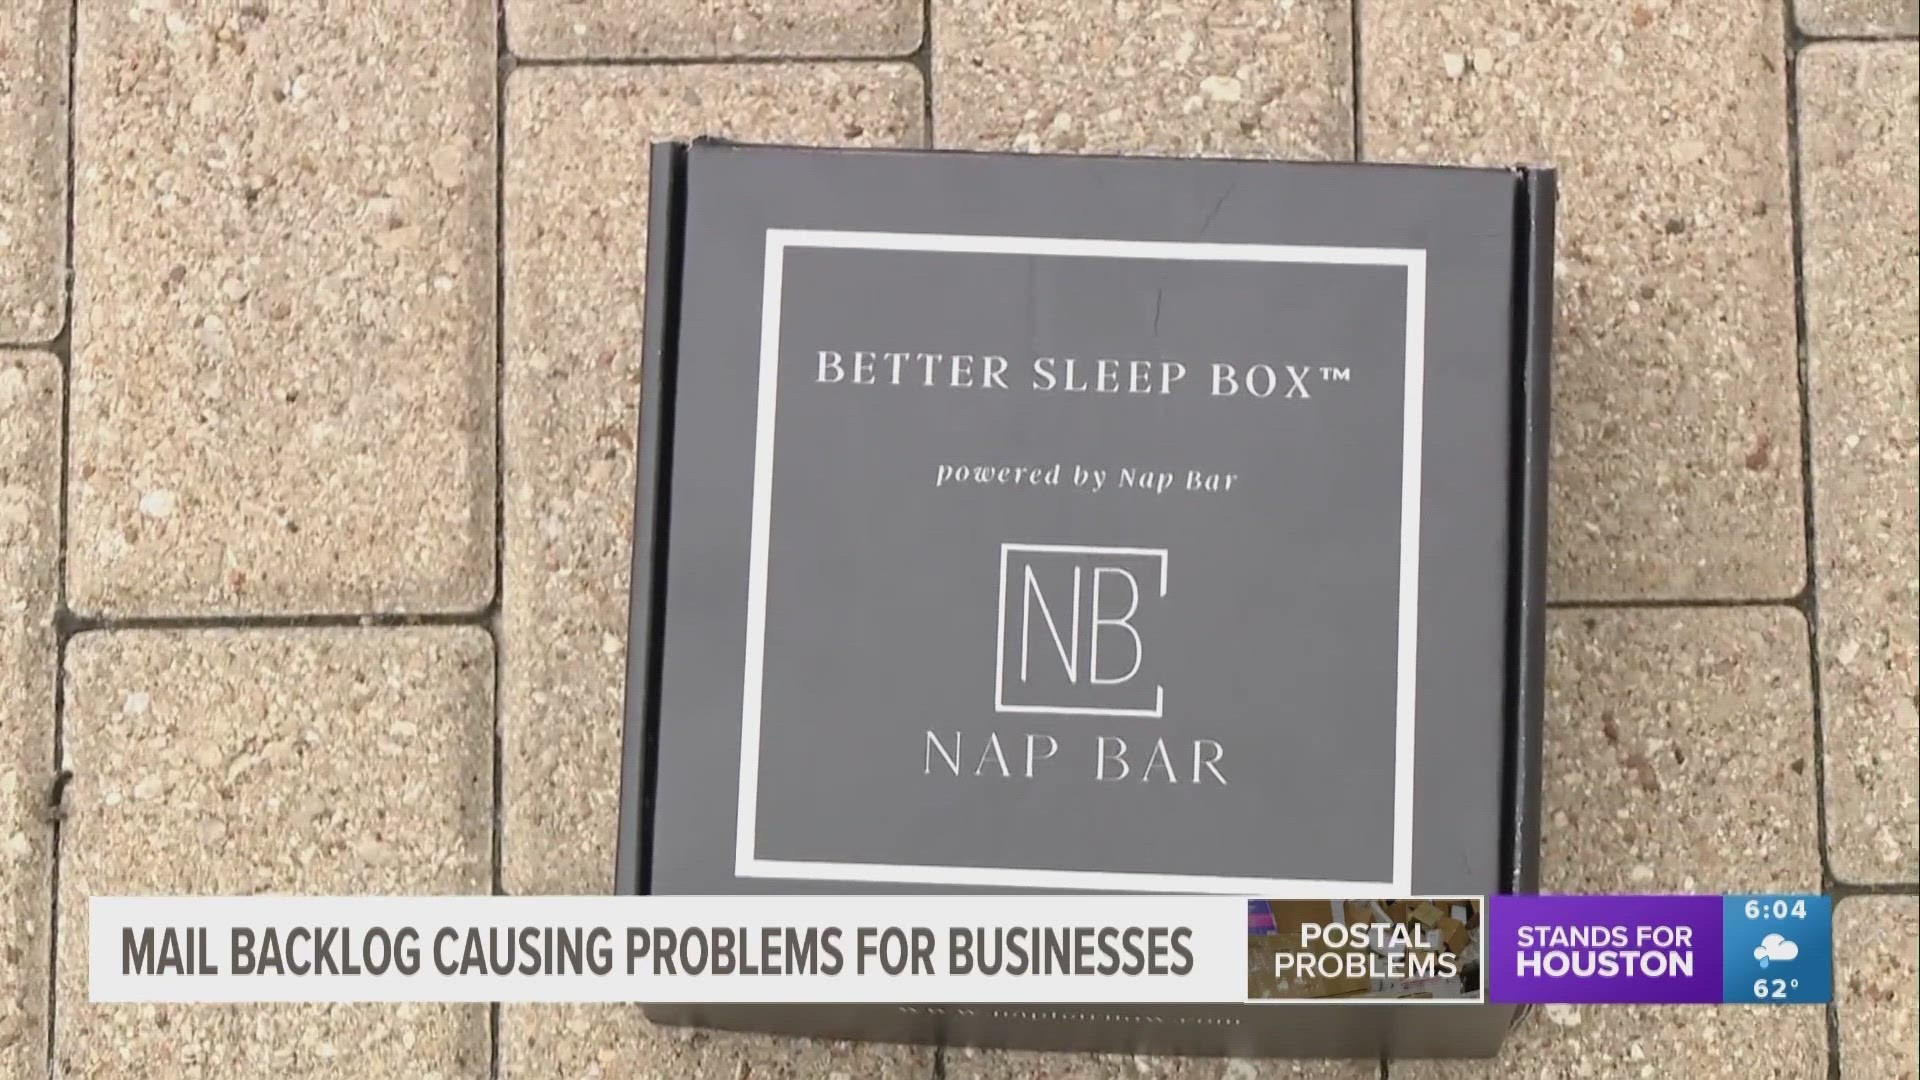 The owner of Nap Bar had to send a sample batch of her products to the Grammys by a certain deadline, but the products never arrived because of the mail backlog.